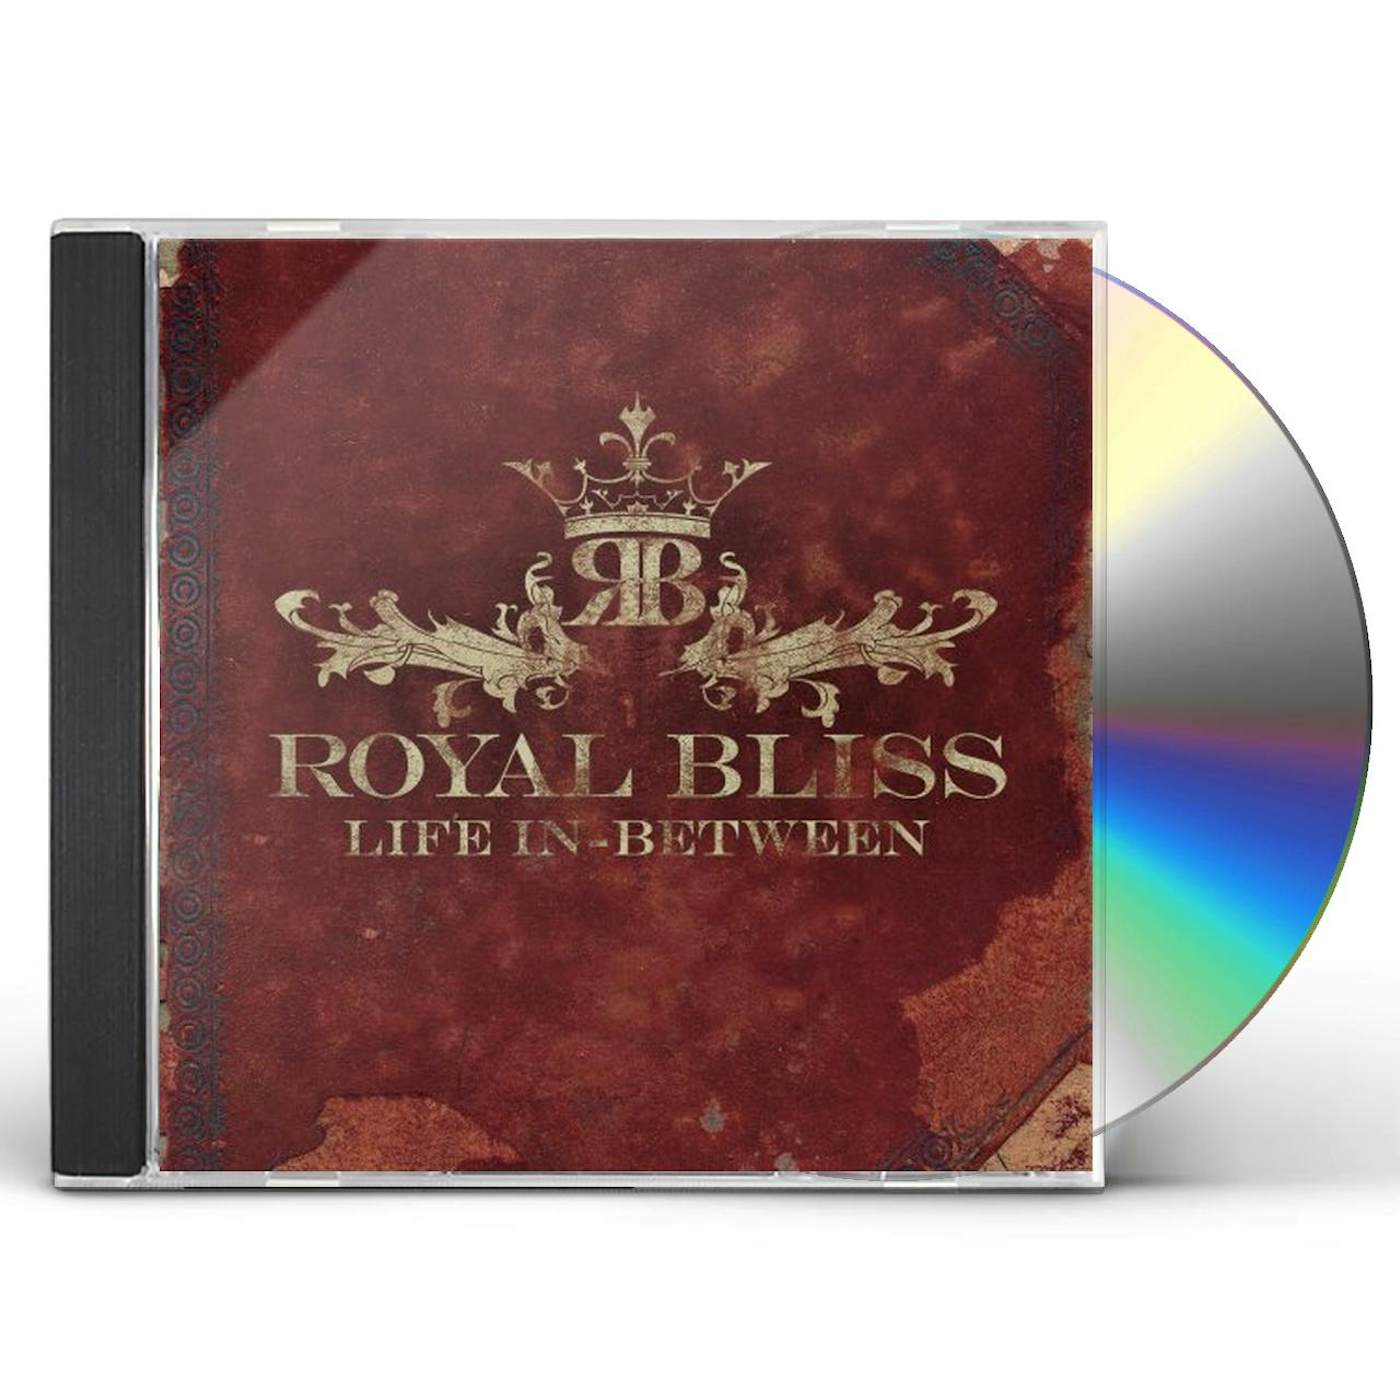 Royal Bliss LIFE IN BETWEEN CD